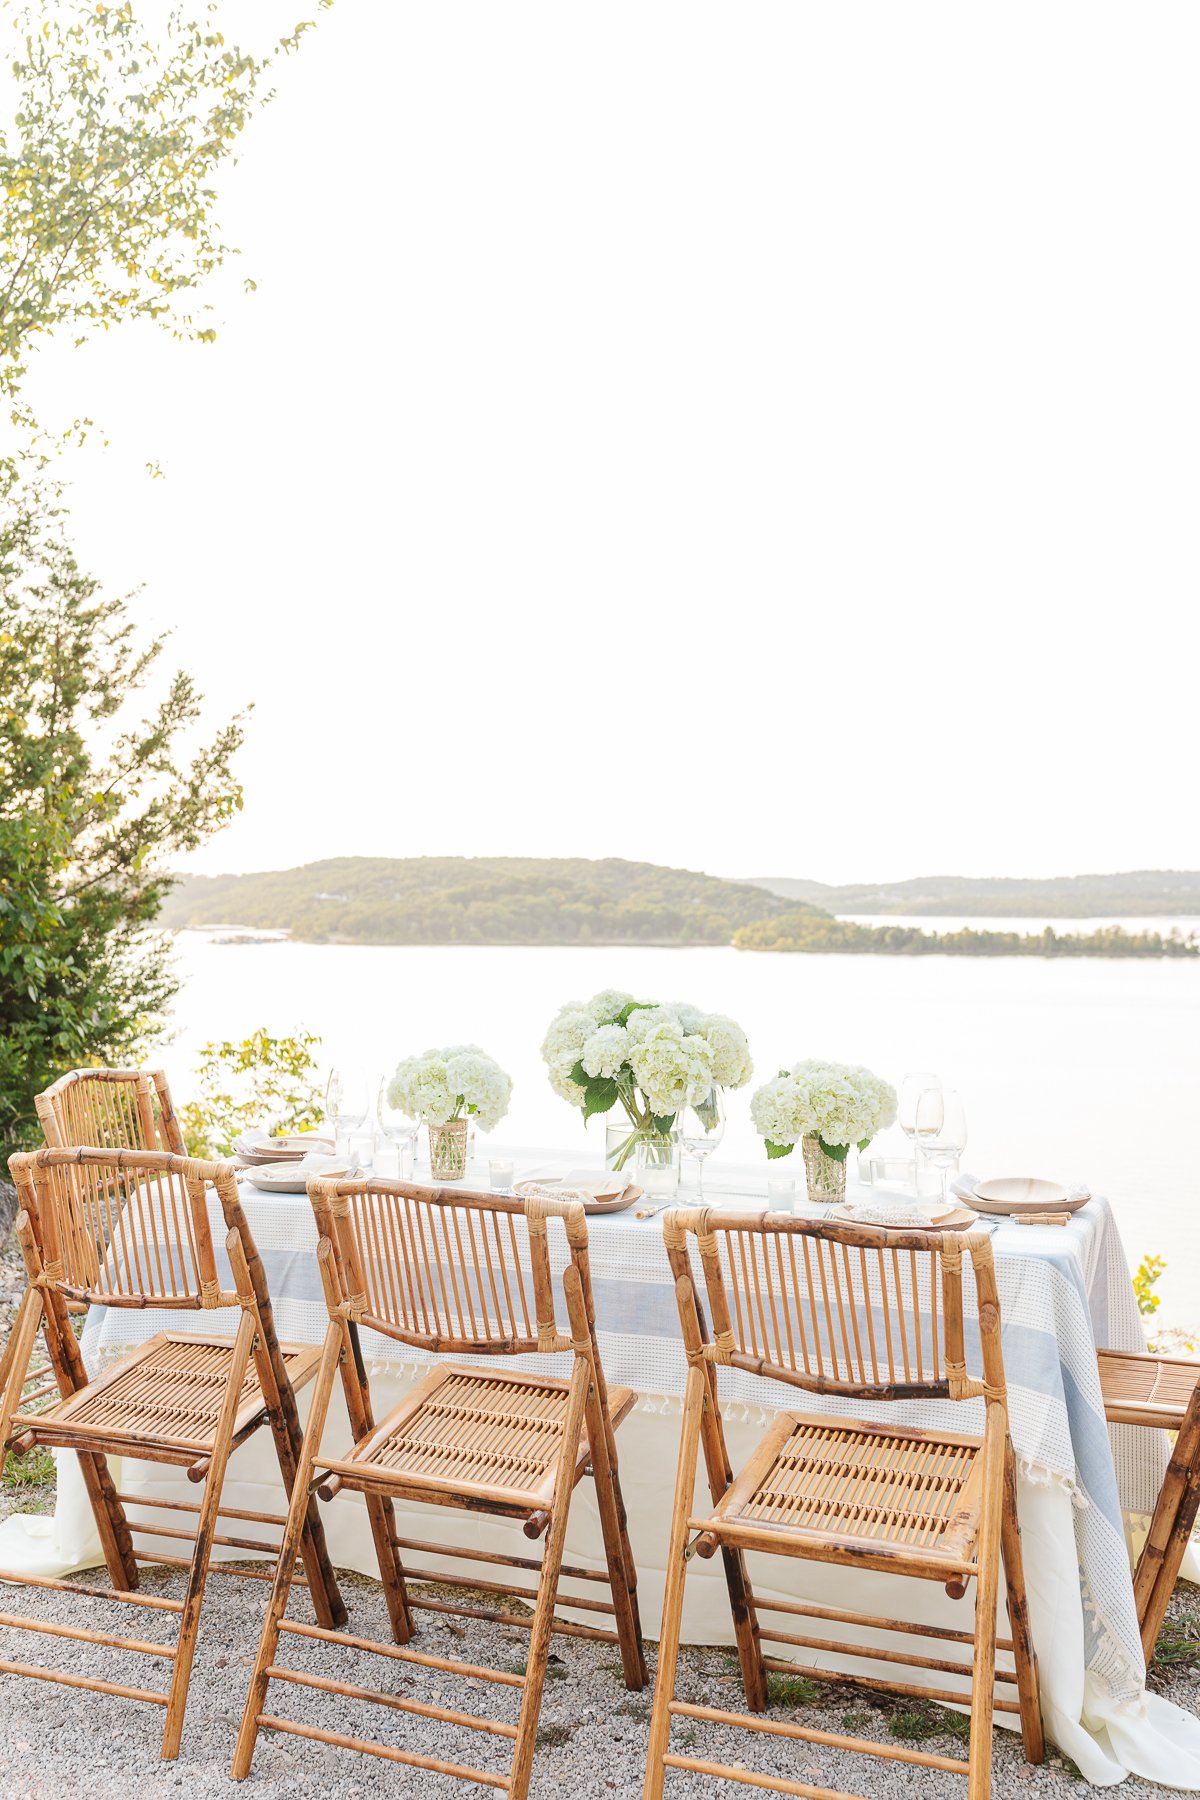 A table set up with bamboo dining chairs and water views for al fresco dining.